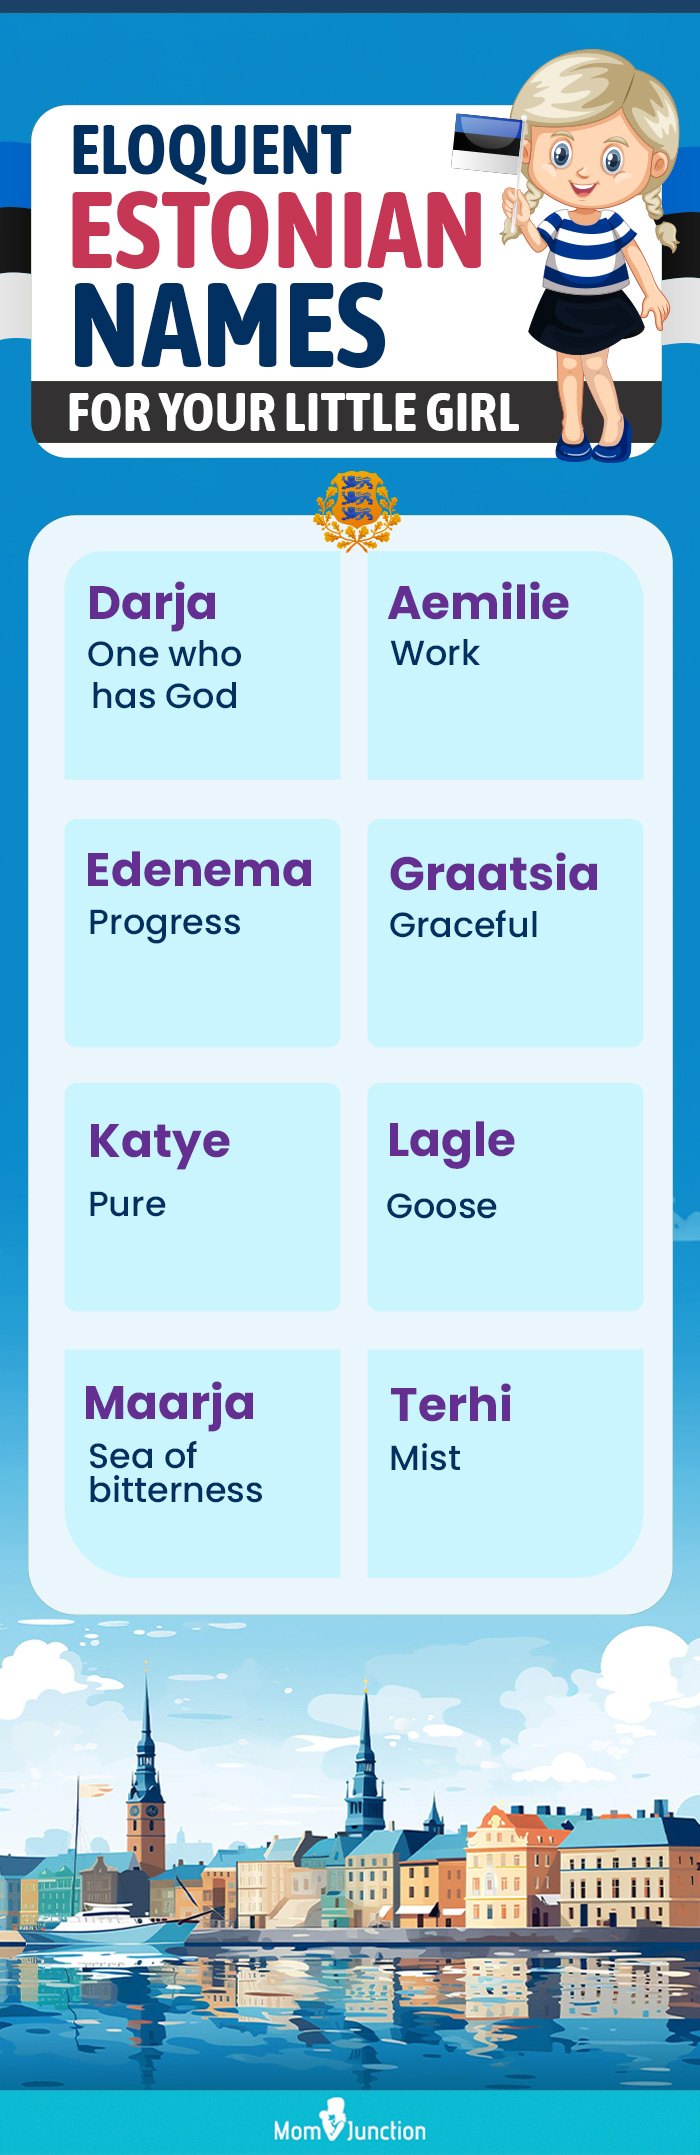 eloquent estonian names for your little girl (infographic)